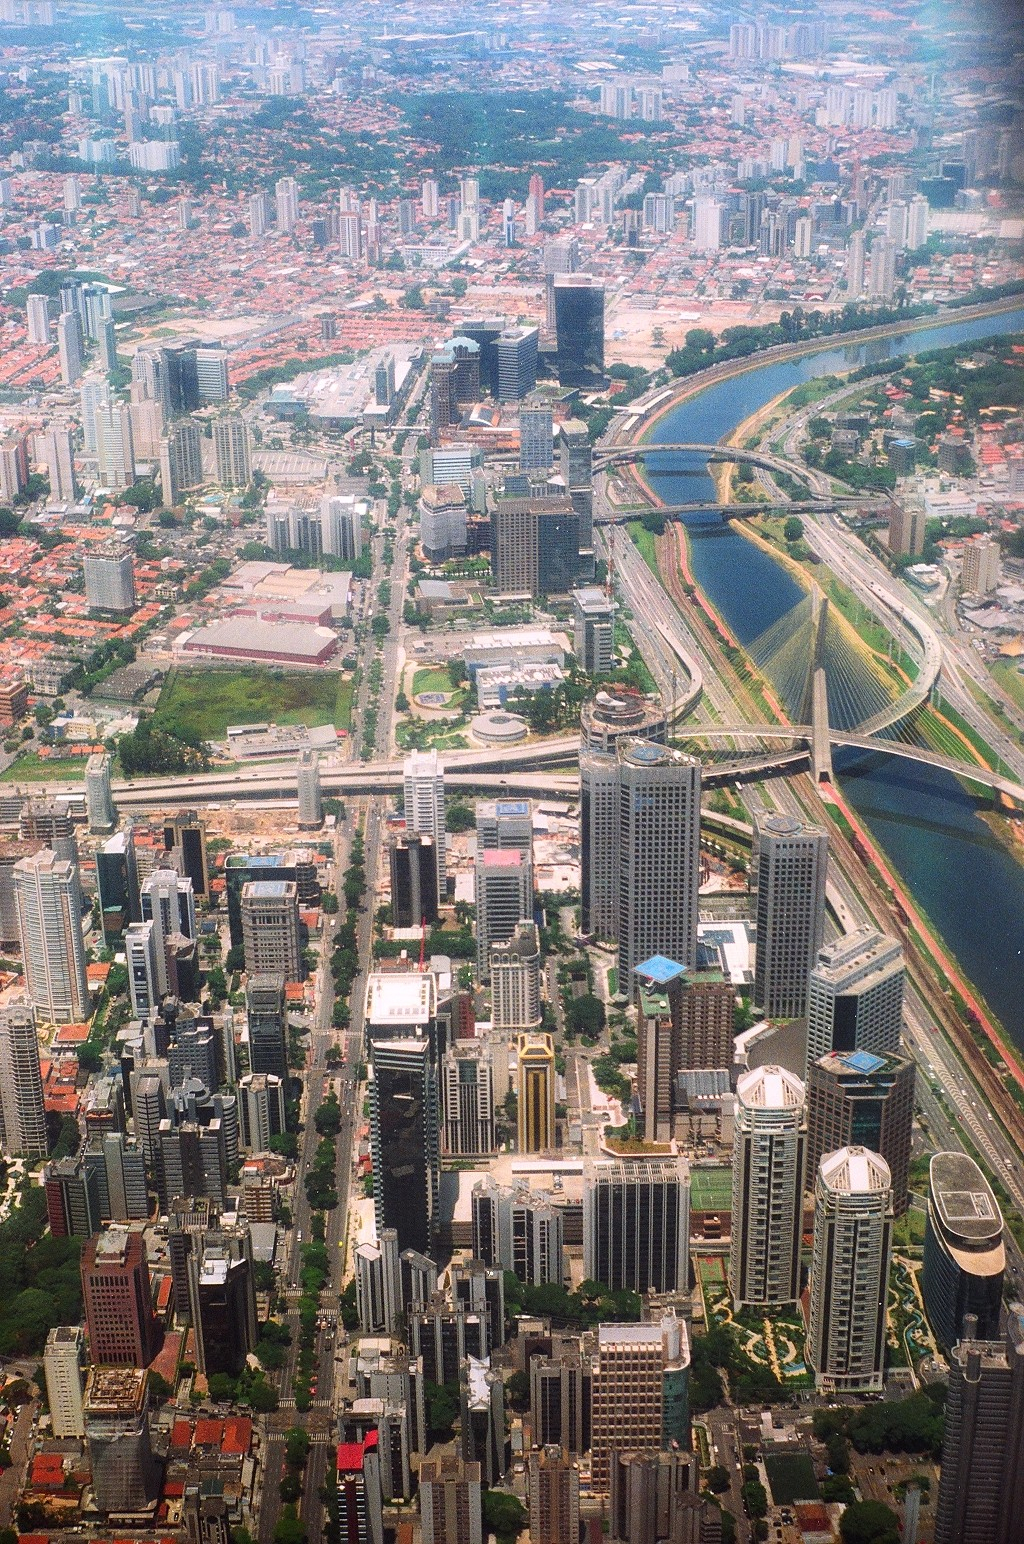 How São Paulo Uses “Value Capture” to Raise Billions for Infrastructure